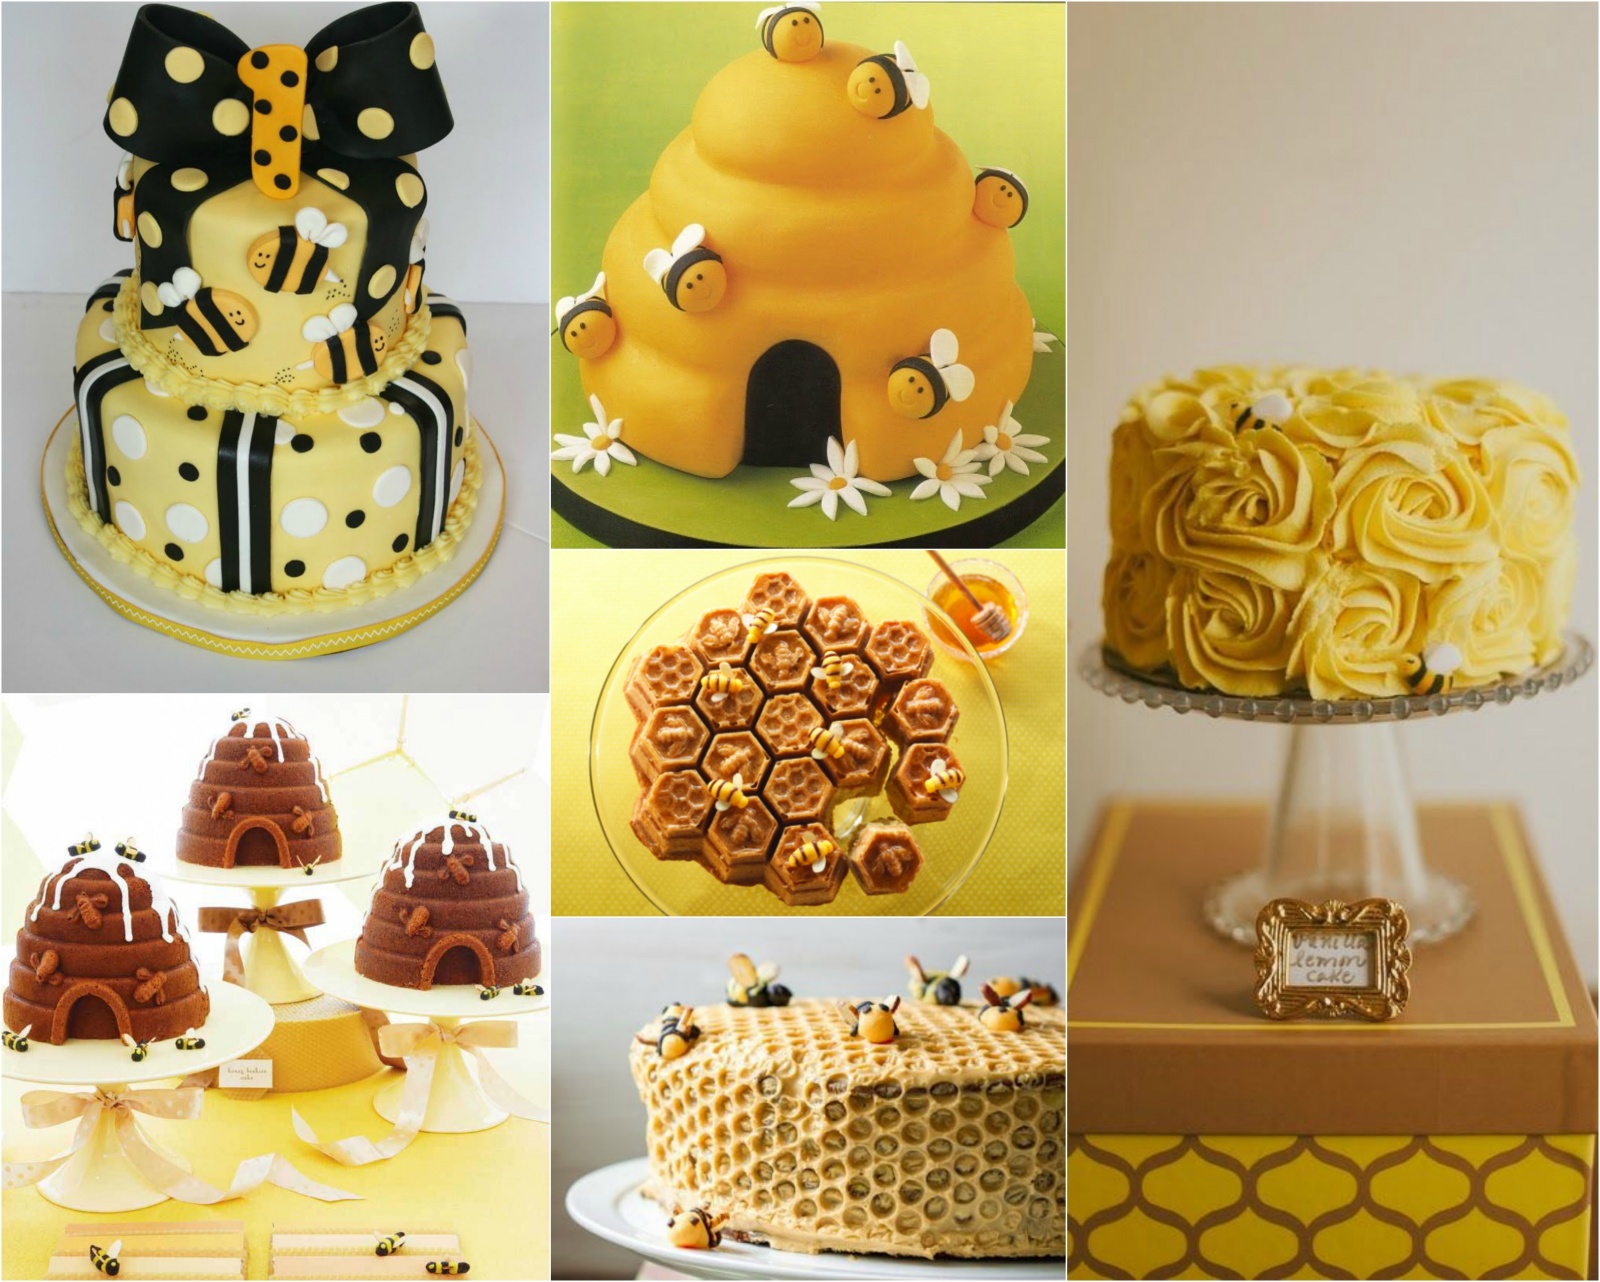 Bee Themed Party Inspiration - Birthday Party Ideas for Kids